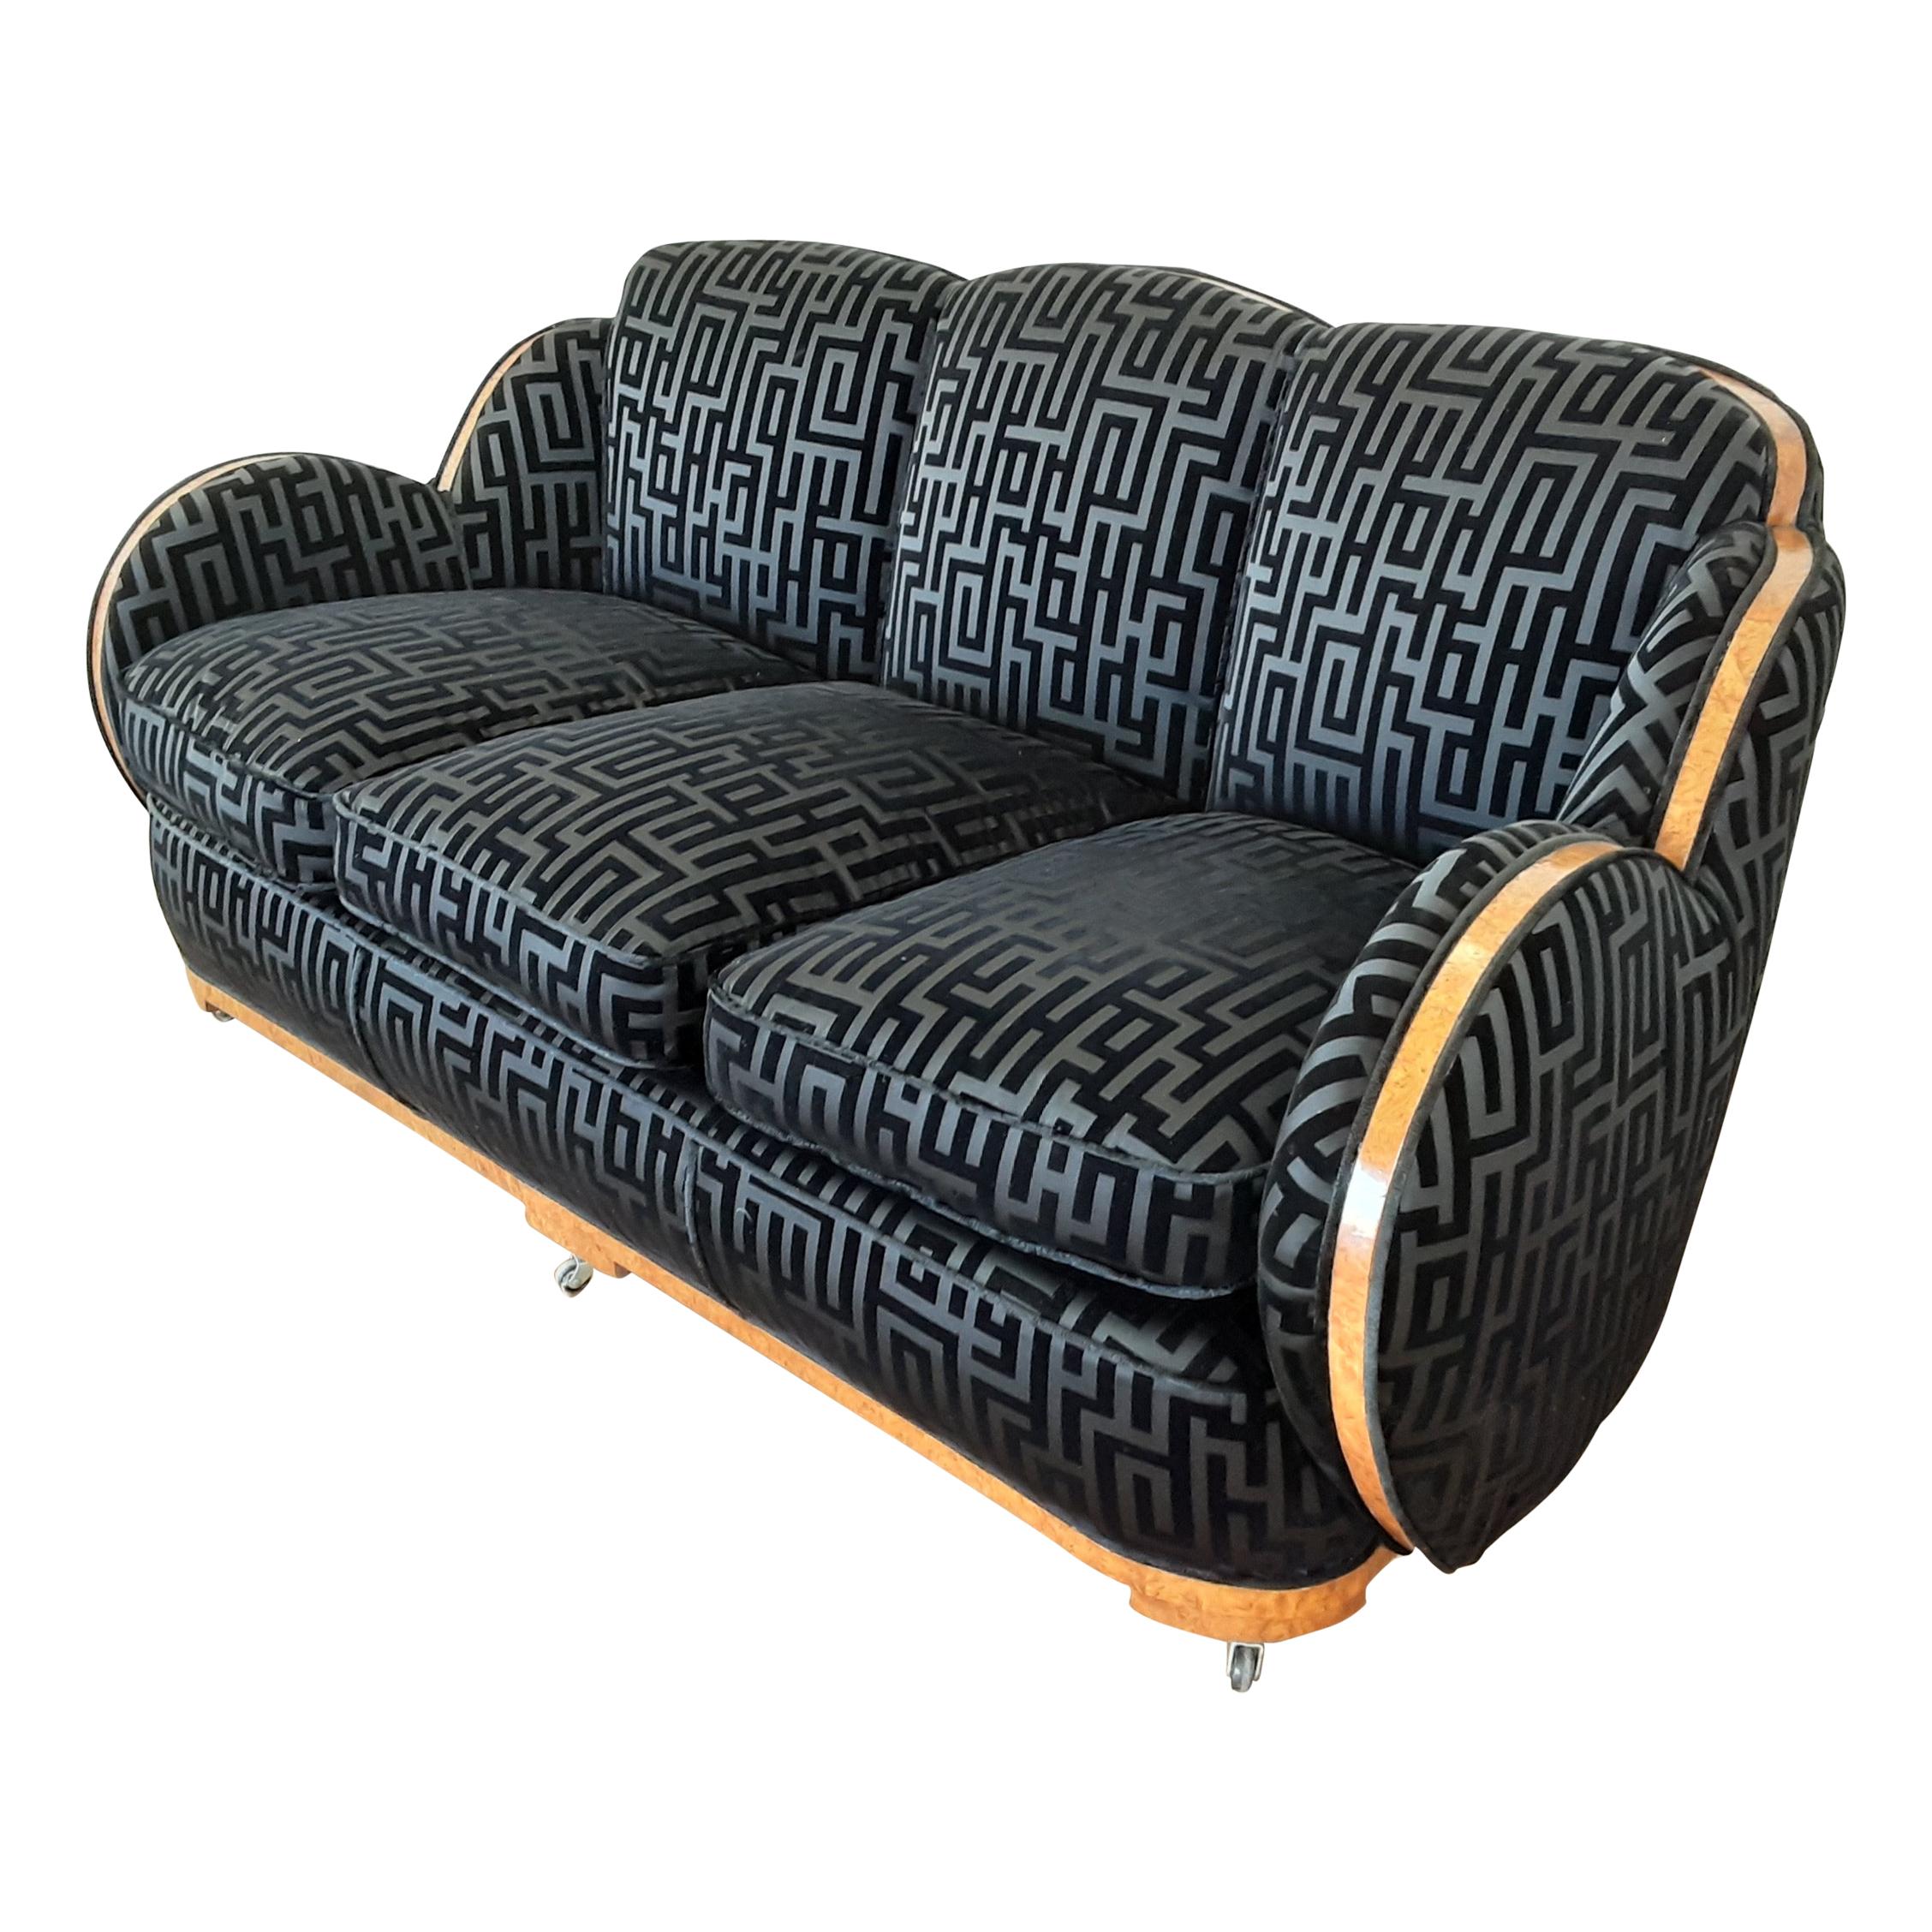 British Art Deco Cloud Back Sofa by Epstein in an Armani Style Fabric circa 1930 For Sale